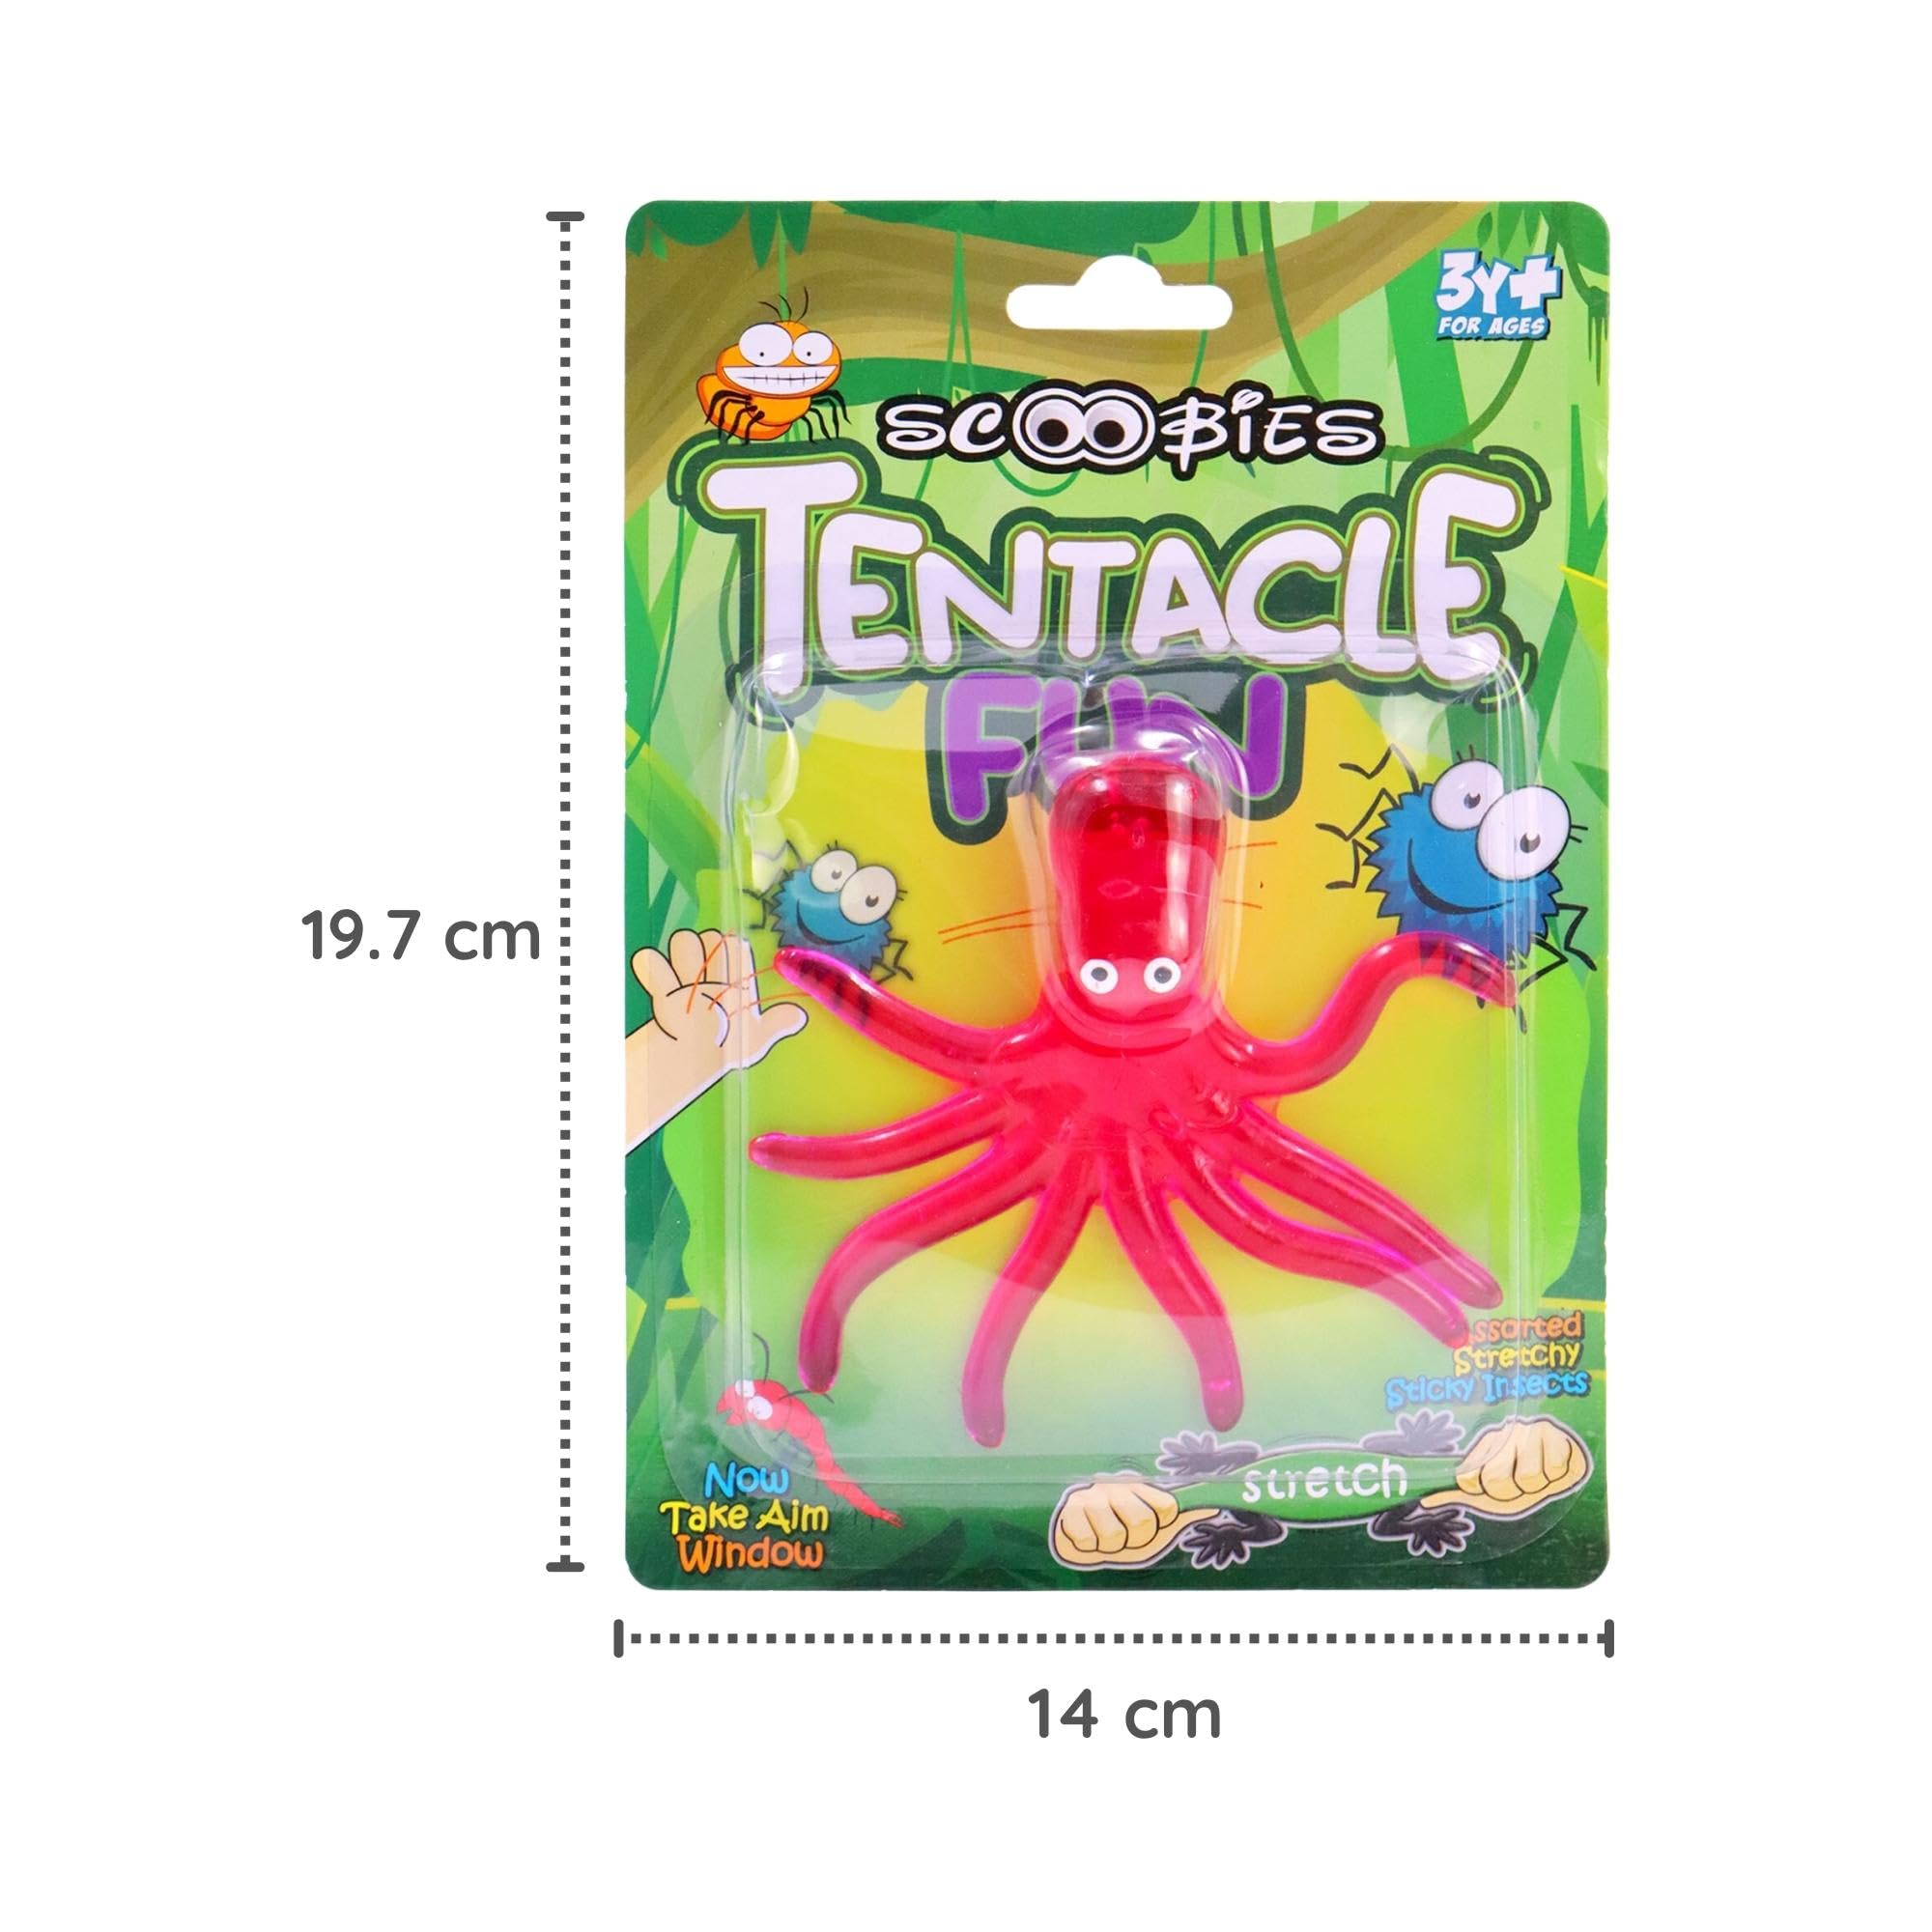 bella styles recommends octopus tentacle toy pic